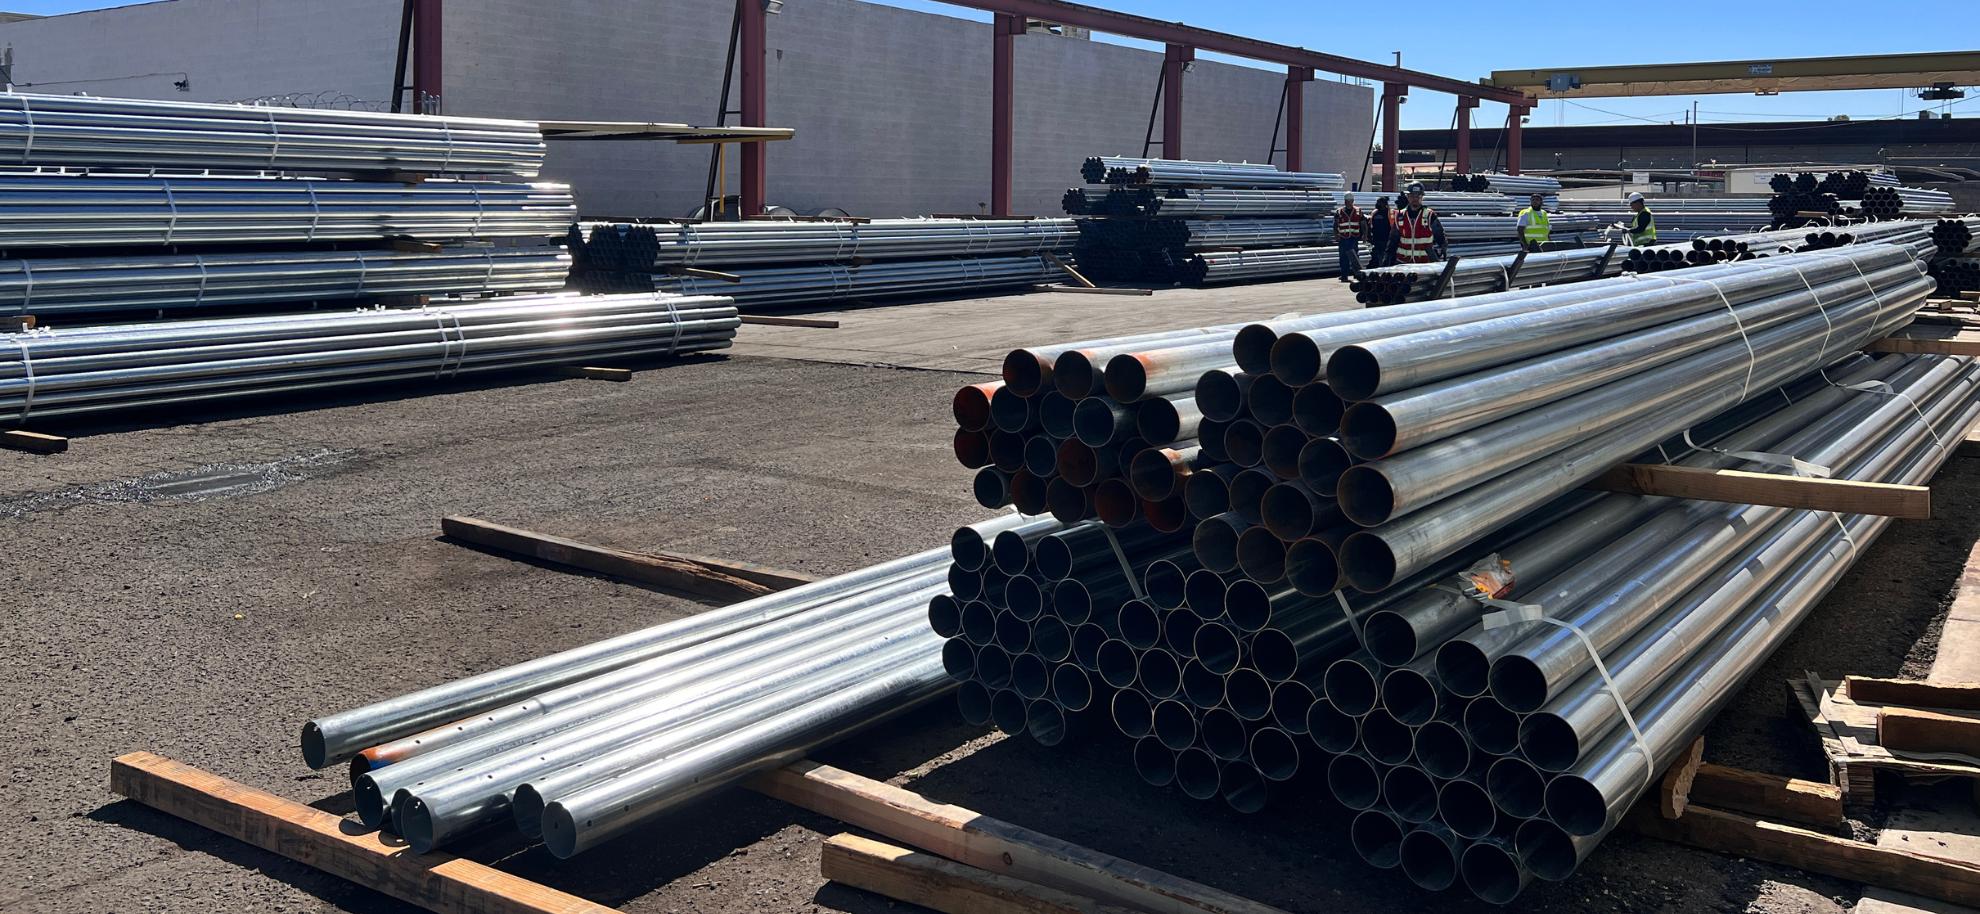 Unimacts manufactures steel tubing for solar farms.